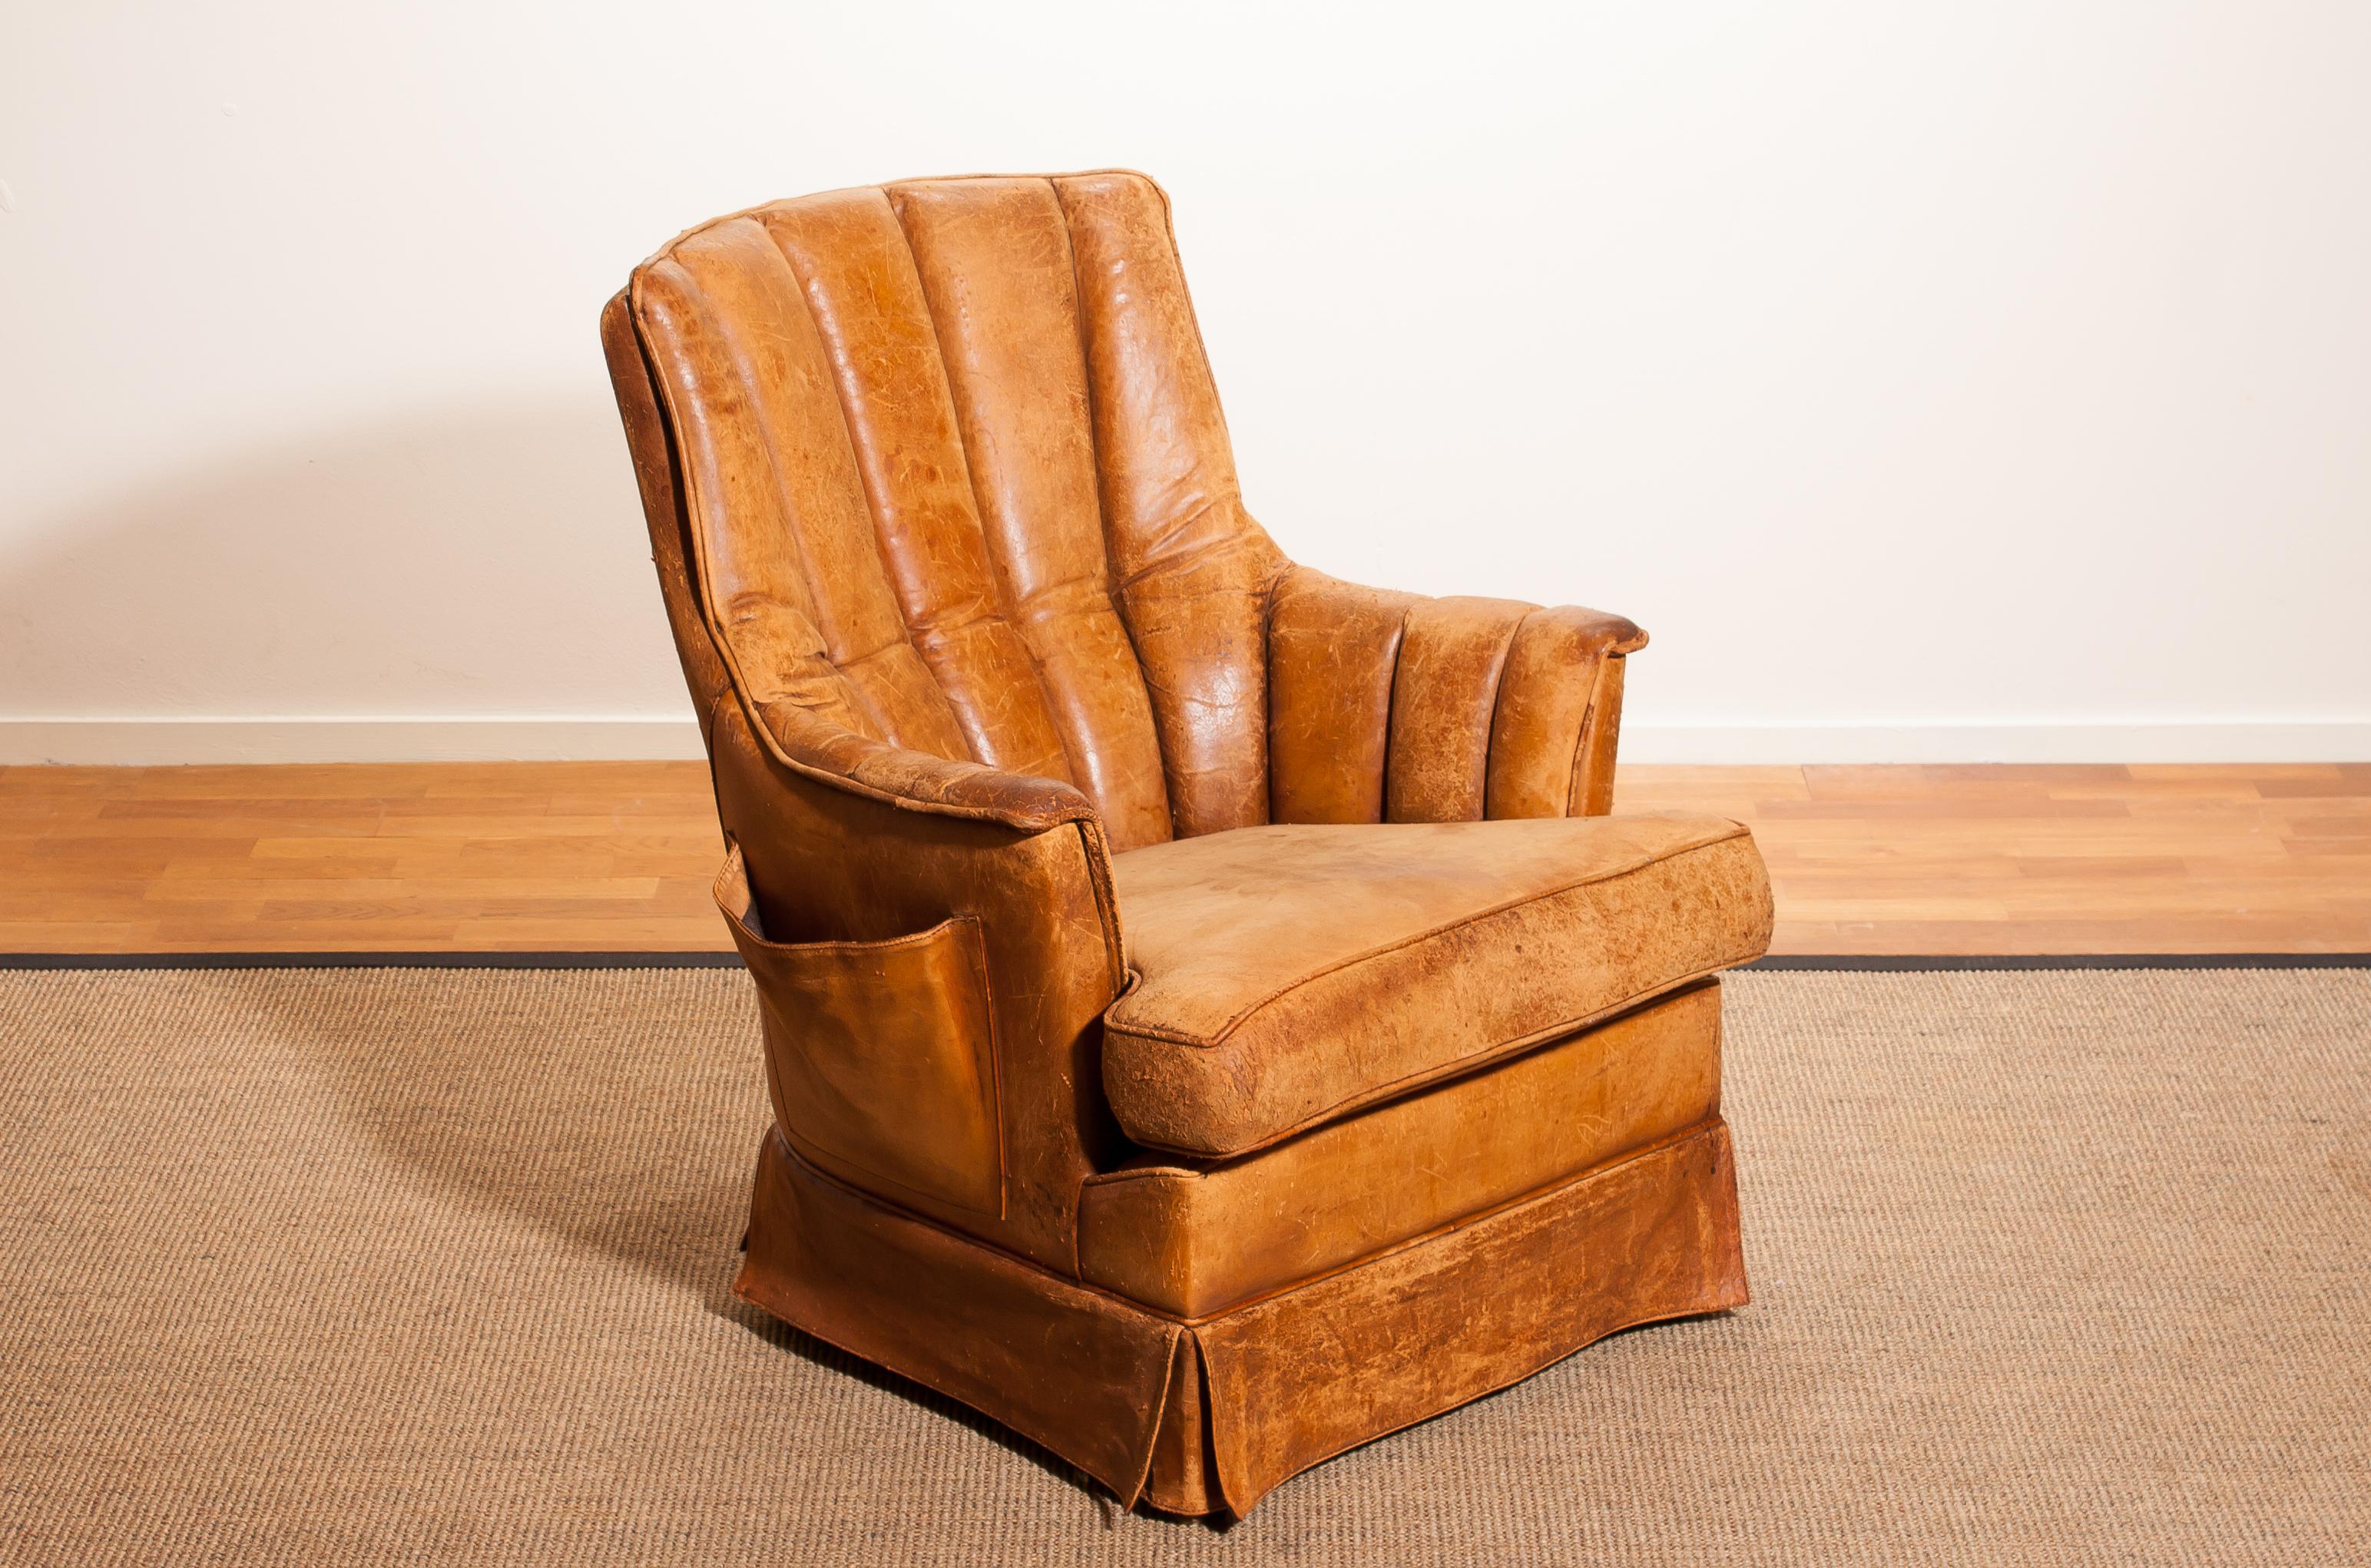 Fantastic club armchair from France.
This chair is made of leather with a skirt and a magazine bag on its side.
It has a greatly used patina.
Period 1940s.
Dimensions: H 85 cm, W 75 cm, D 68 cm, SH 46 cm.